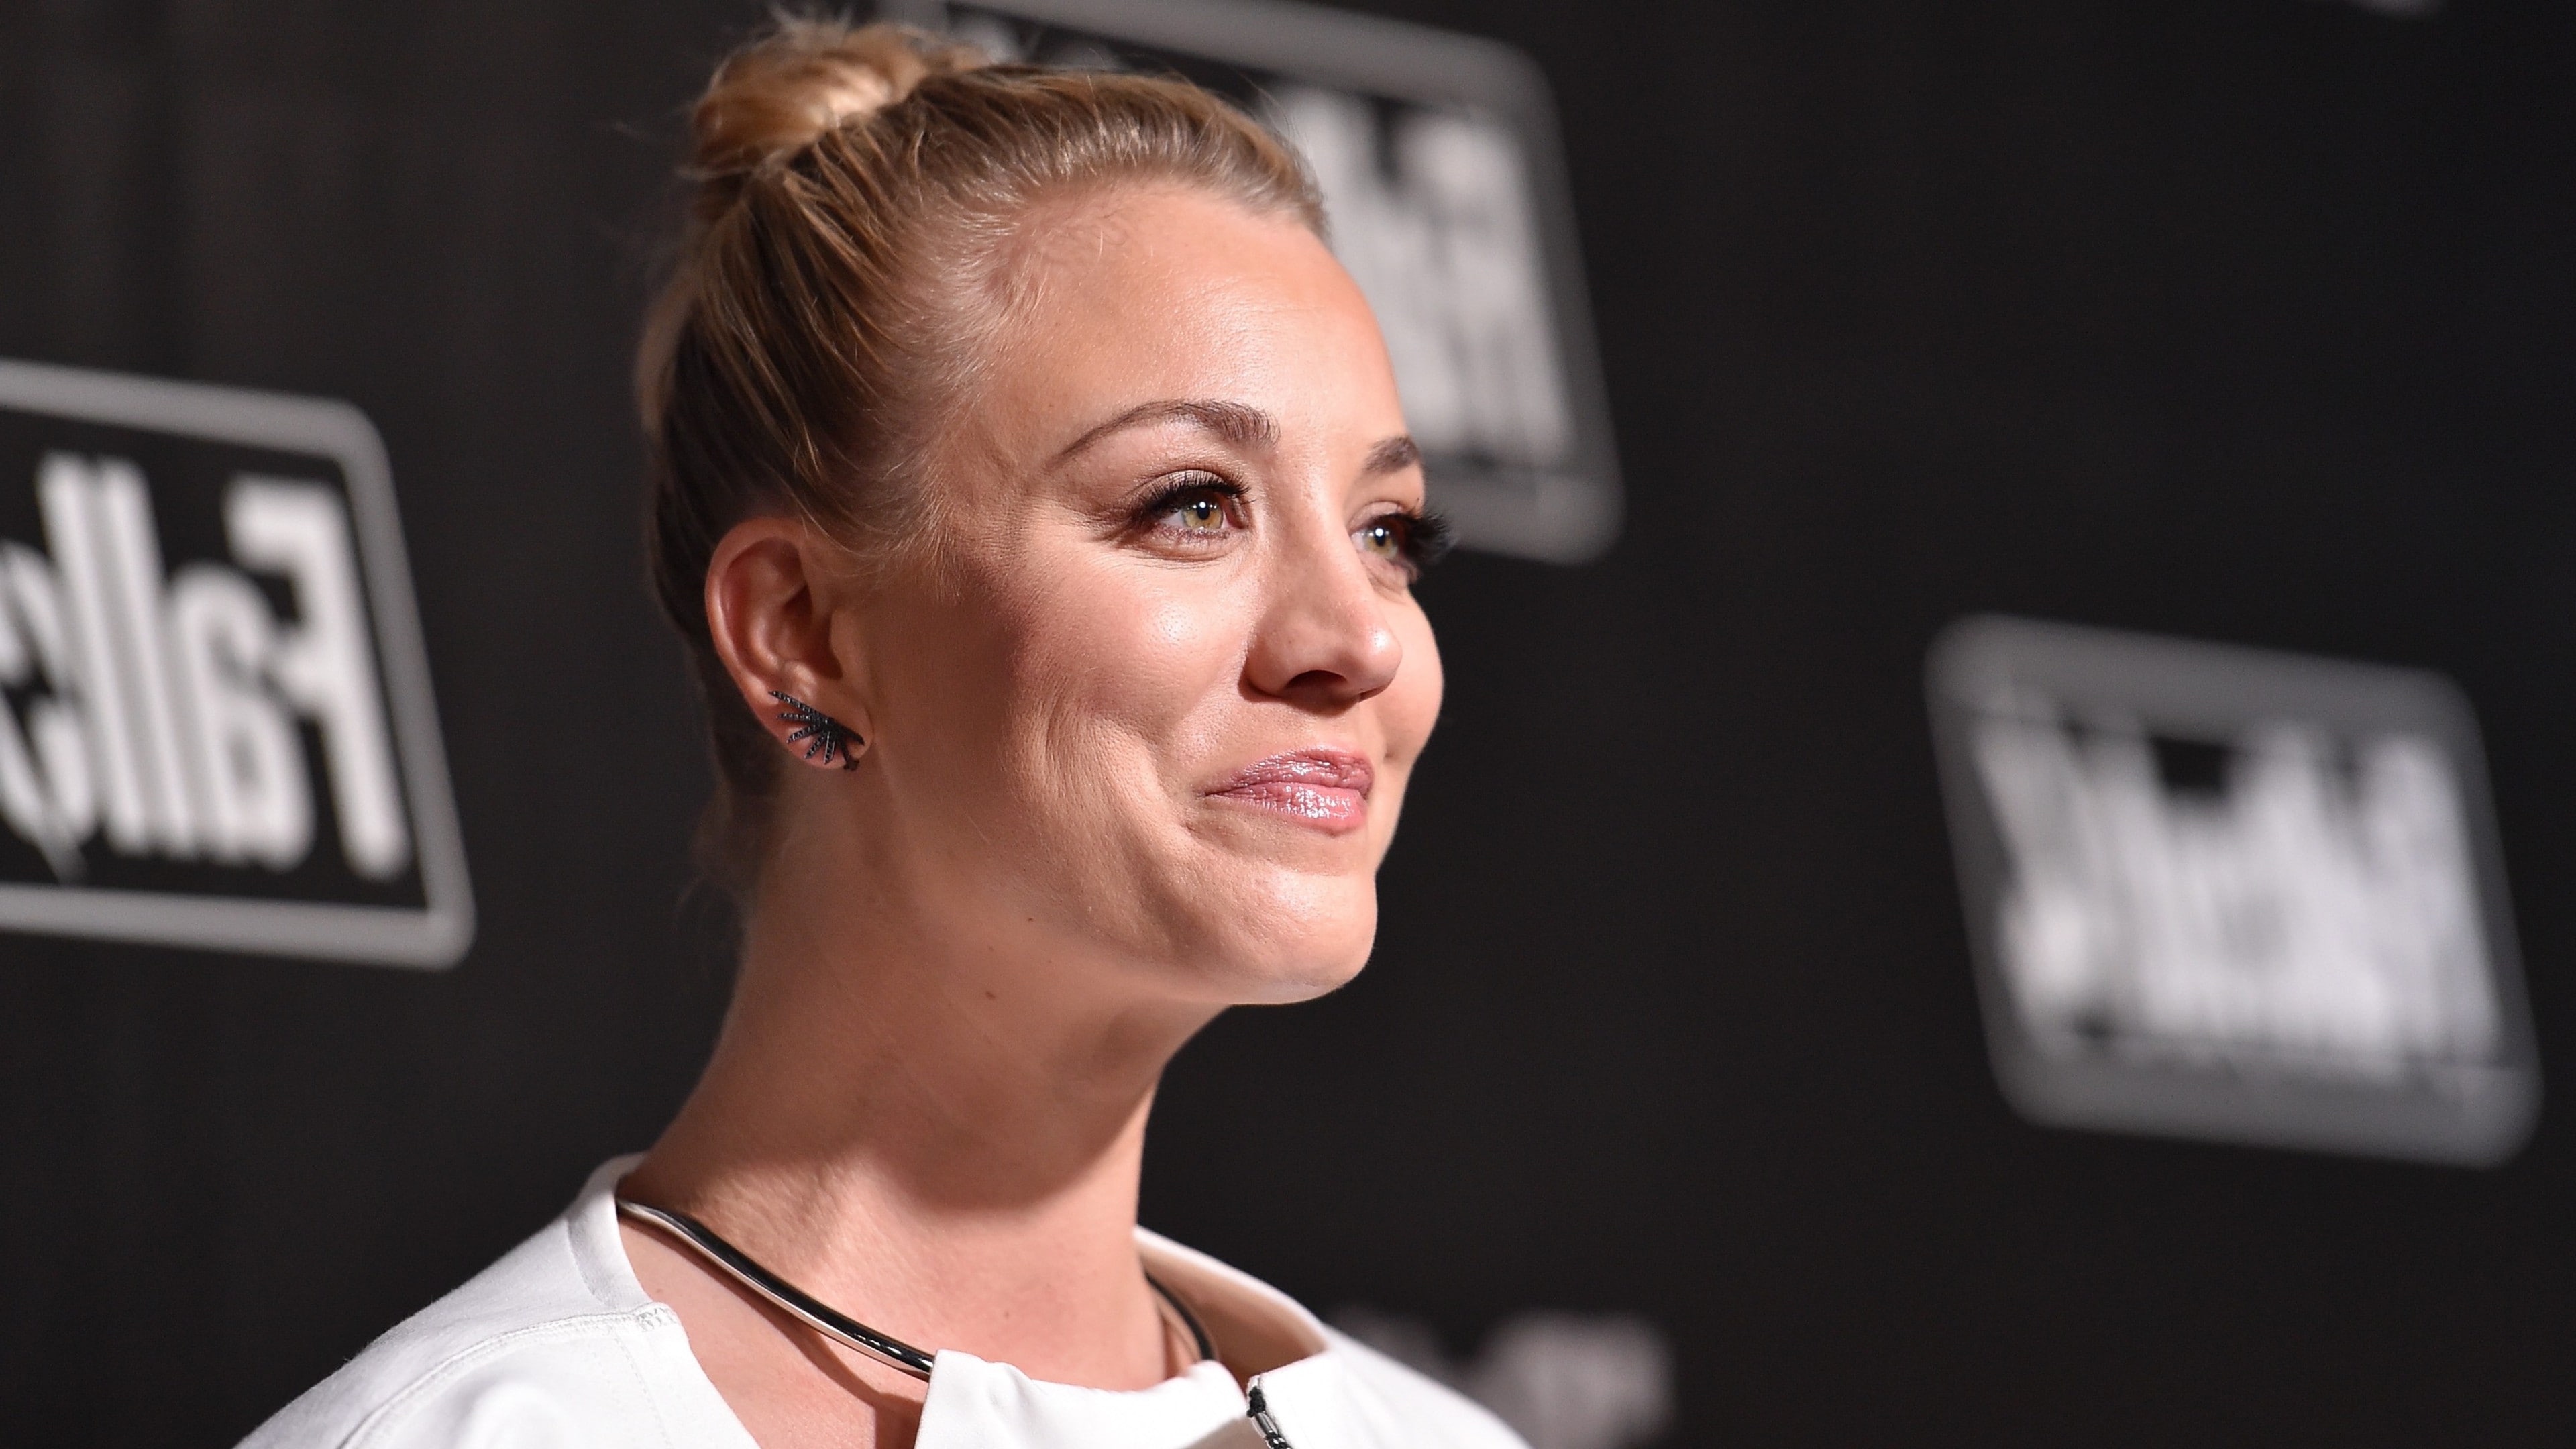 big bang theory, celebrities, kaley cuoco, adult, one person